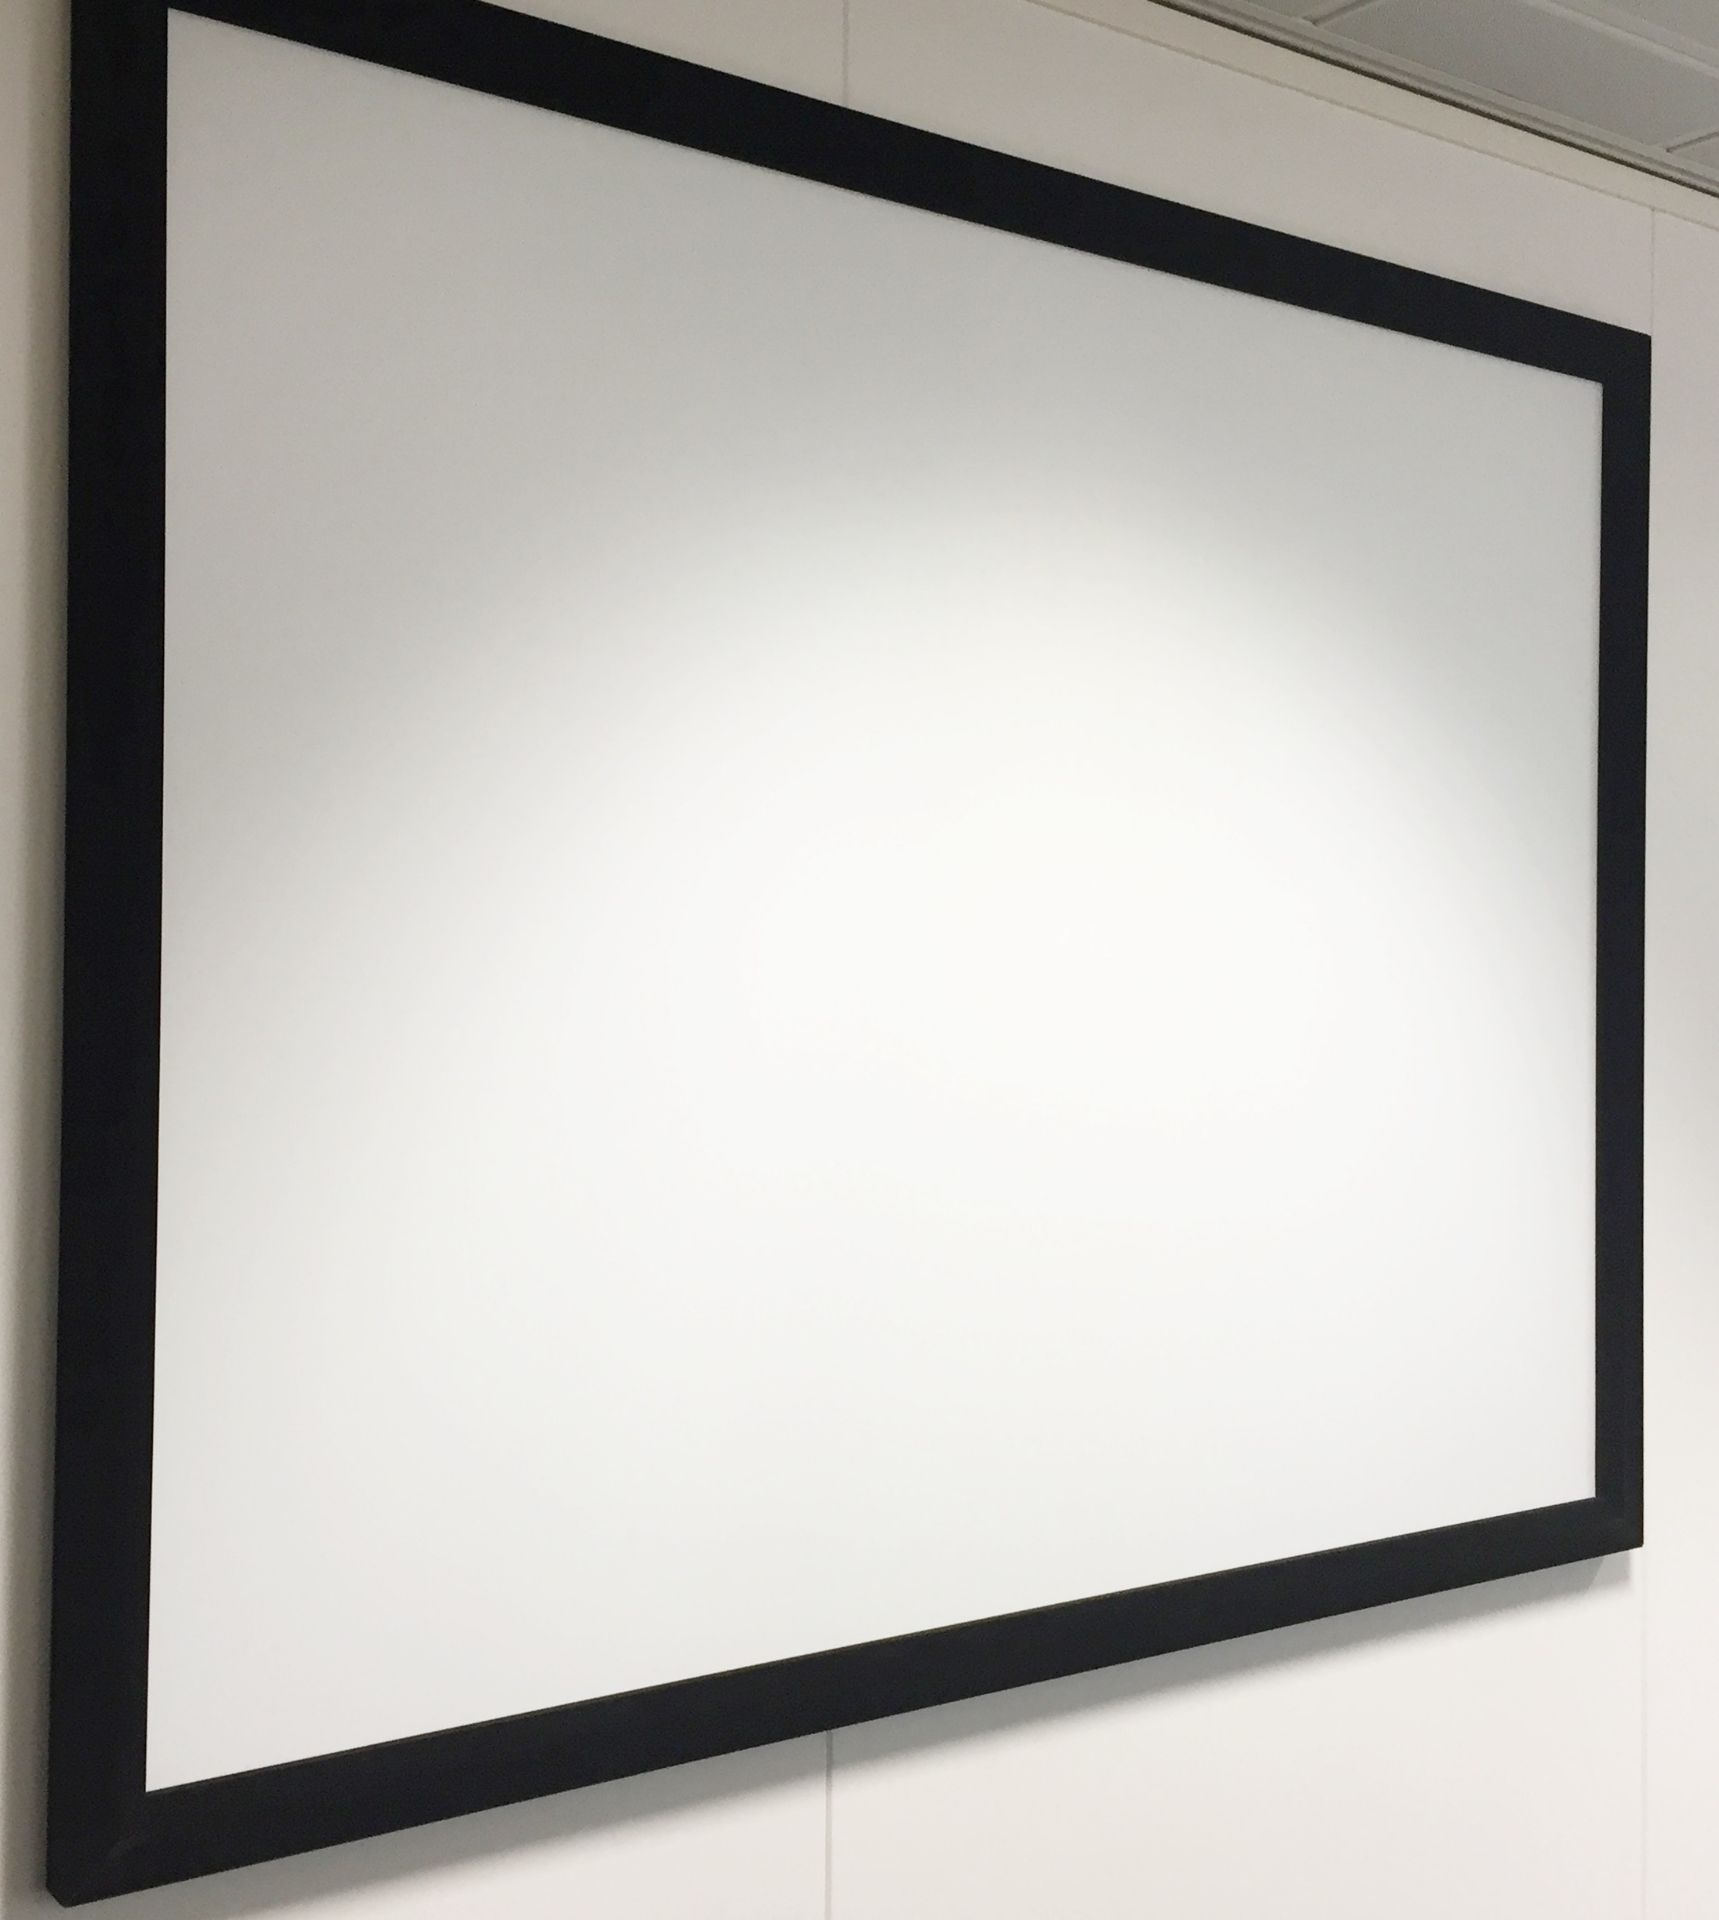 1 x Fixed Frame CINEMATIC Projection Screen - Large Size With Deep Black Velvet Surround - Size